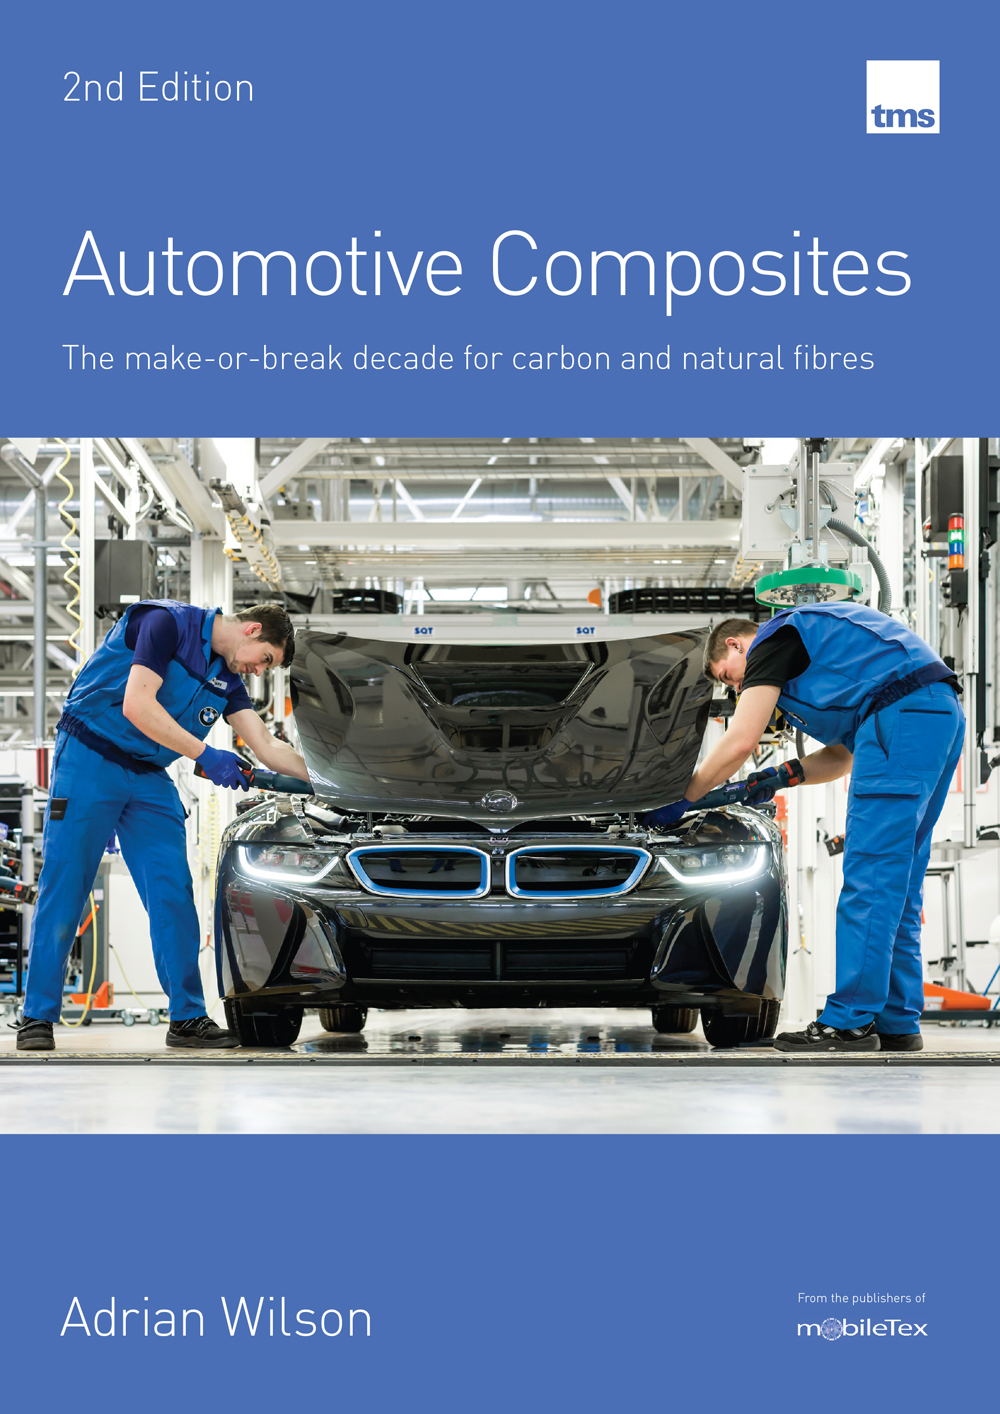 The book reviews the history and current use of composites in the automotive sector.